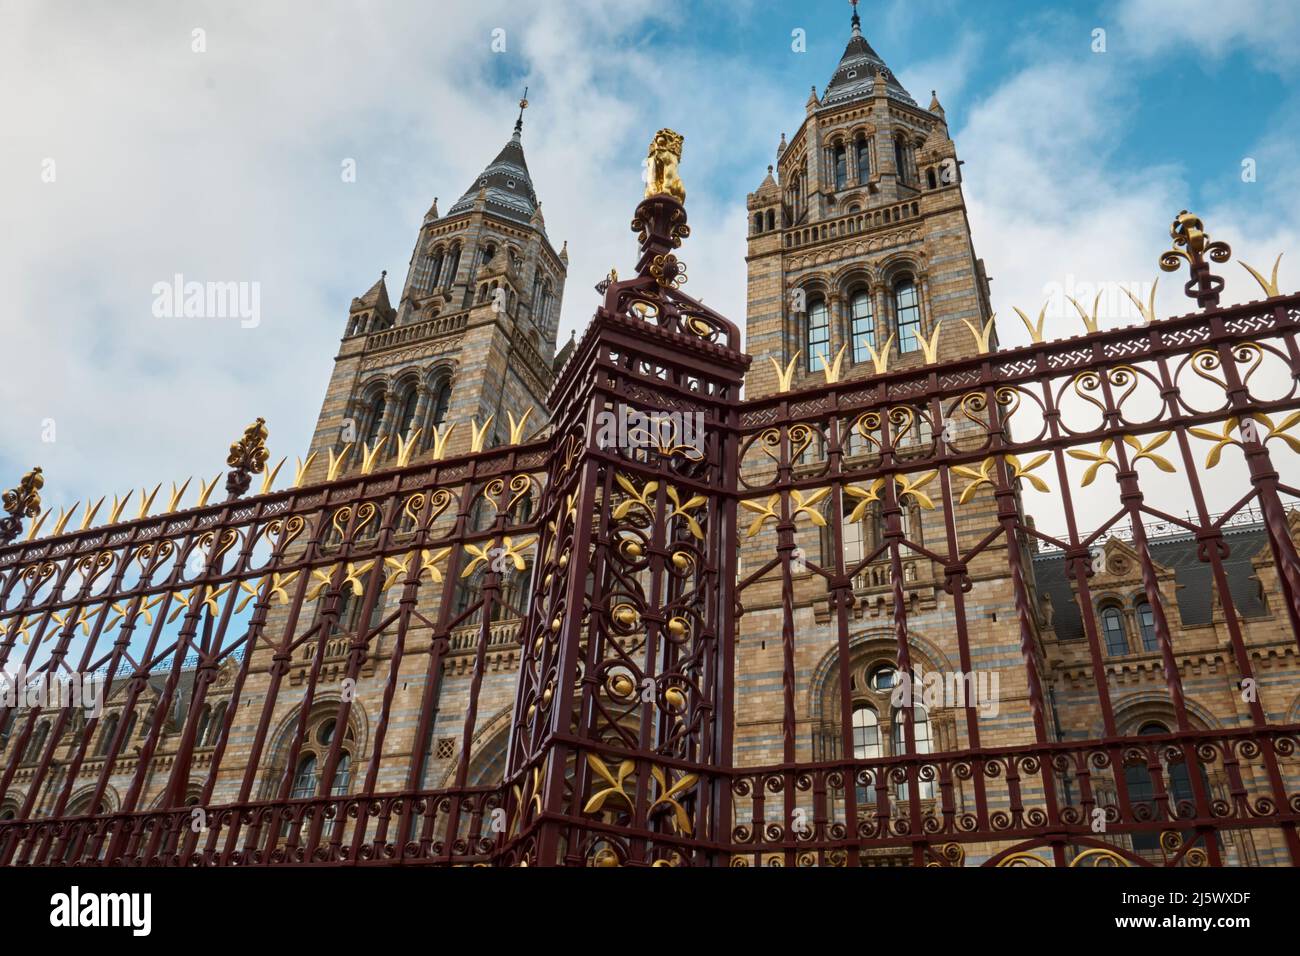 Railing and Exterior Detail of The Natural History Museum, London Stock Photo